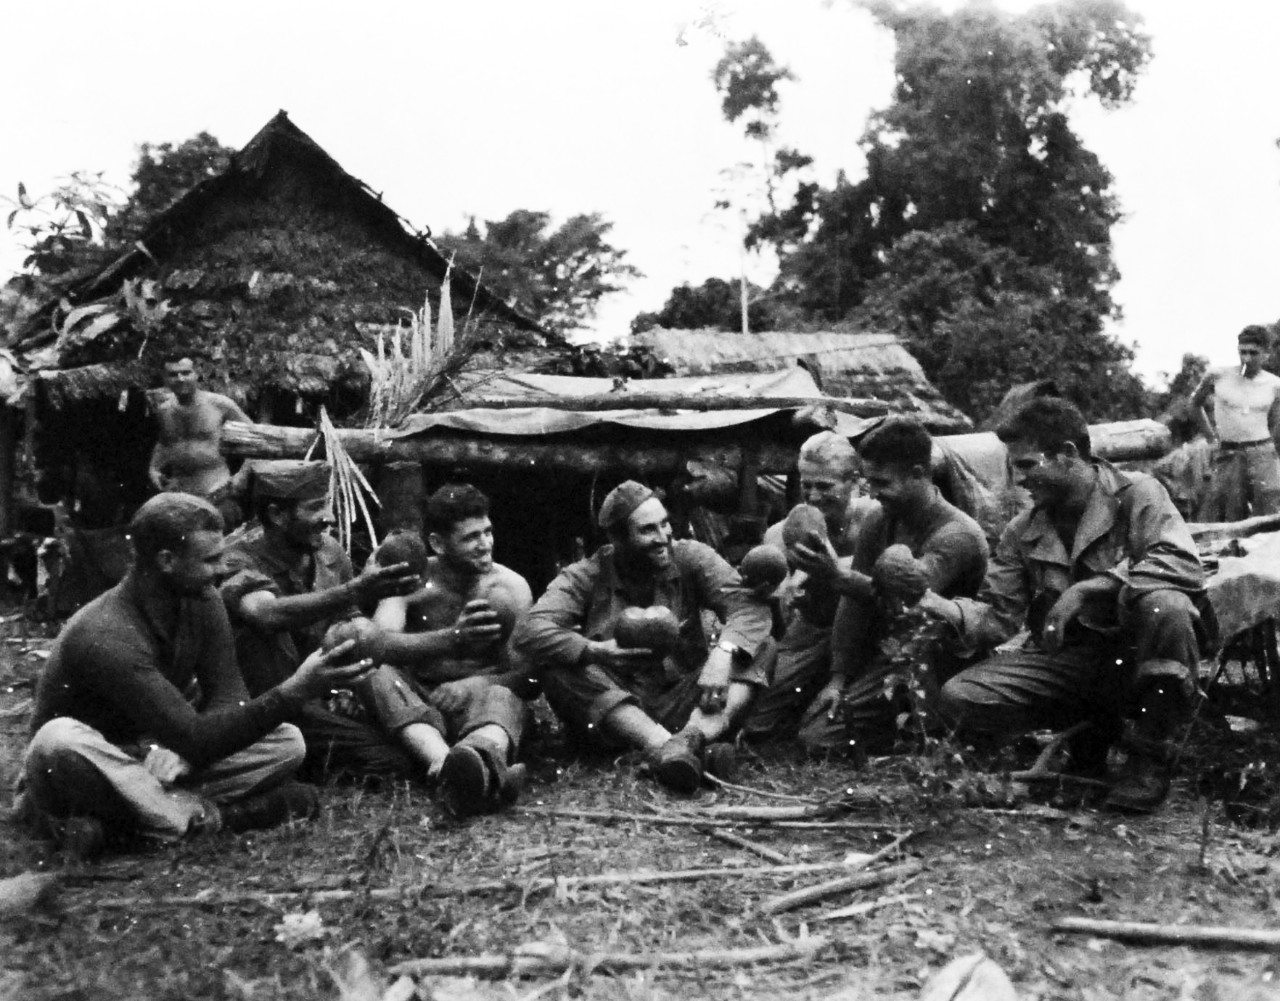 127-GW-966-77431:  Battle of Cape Gloucester, New Britain, December 1943-January 1944 “Birthday Toast”.   A toast if drunk in coconut juice on the occasion of the 24th birthday of Sergeant Milan A. Cicak, USMC.  The birthday found him and his buddies on a patrol in the Cape Glouchester jungle.  That’s Cicak in the center.  Left to right:  Gunnery Sergeant William E. Eisenhower; Private First Class Dominik D. Garogano.   Official U.S. Marine Corps Photograph, now in the collections of the National Archives.   (2014/7/9).